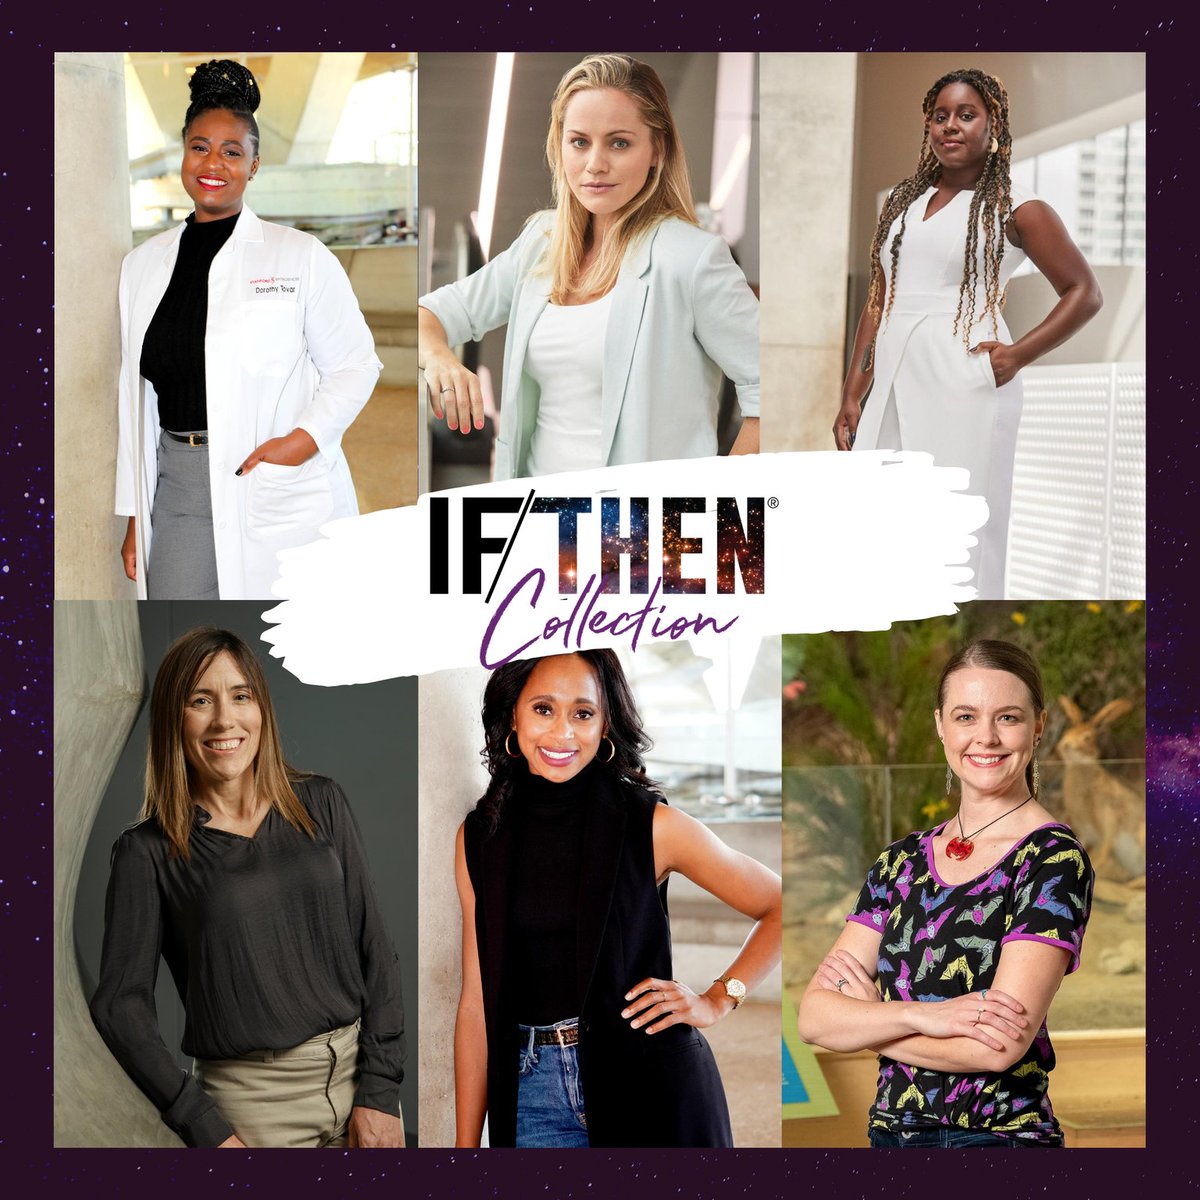  #IfThenSheCan – The Exhibit PREVIEW unveiling Monday, August 17 at the Central Park Zoo in New York, featuring statues of 6  @IfThenSheCan Ambassadors Featuring real women of all ages and diverse backgrounds who work in a variety of STEM careers  #WomenInSTEM